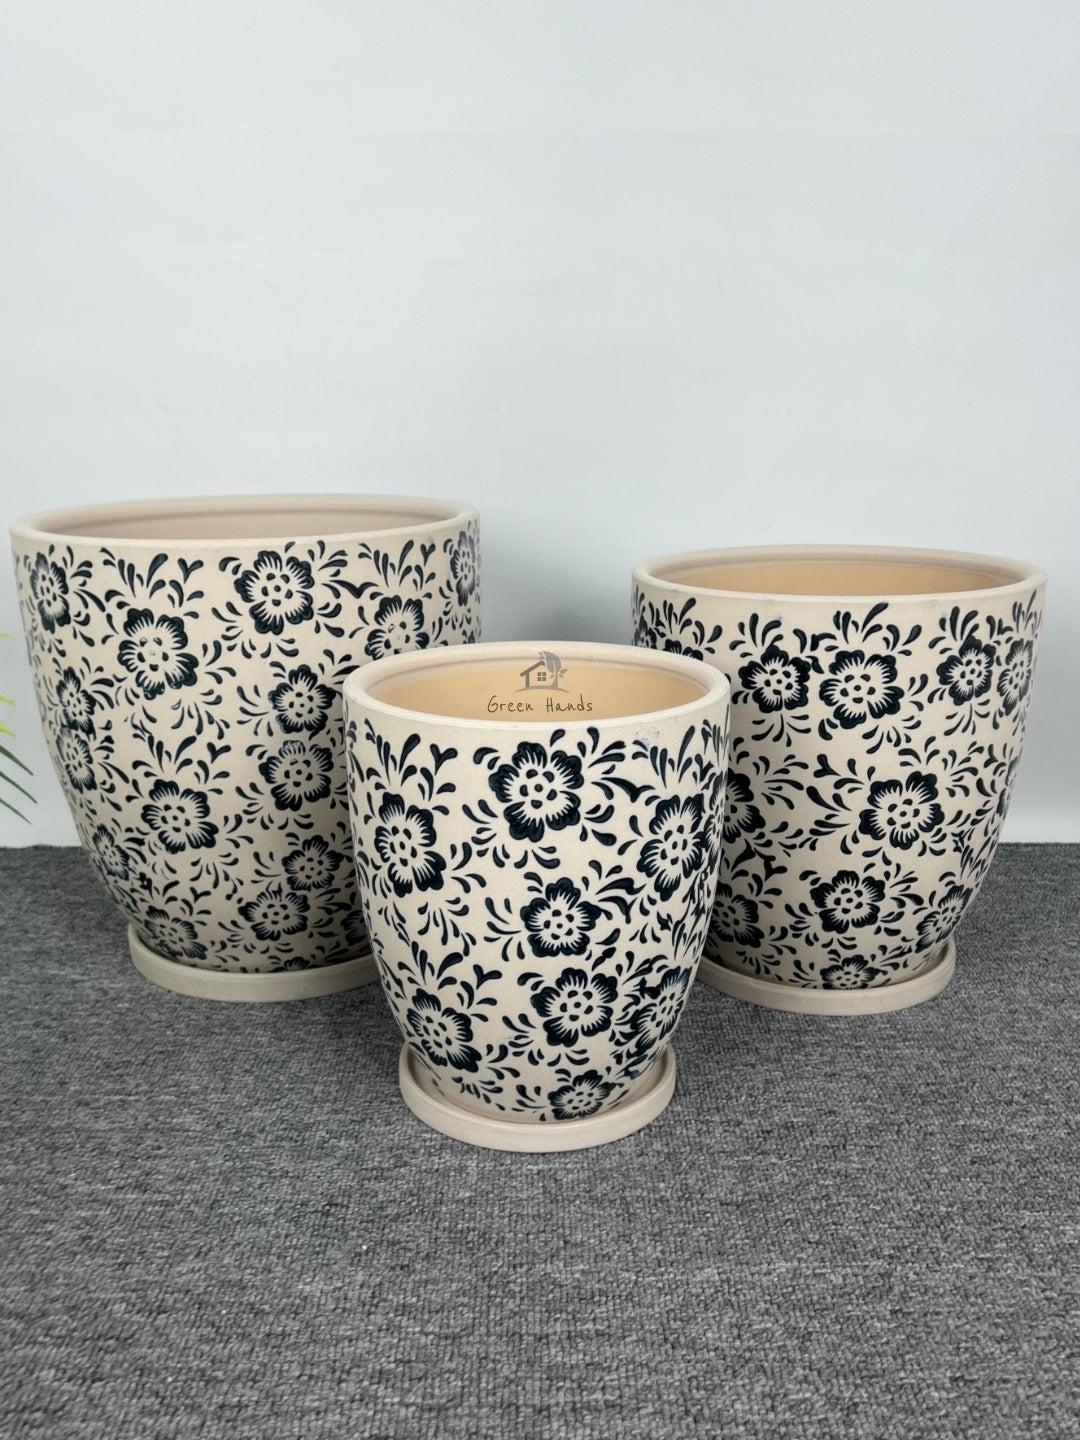 Japanese Imari Art-Inspired Floral Ceramic Pots in Dubai & Abu Dhabi: Ideal for Modern Interiors and Sophisticated Rooms with Drain Hole and Matching Ceramic Base Plates